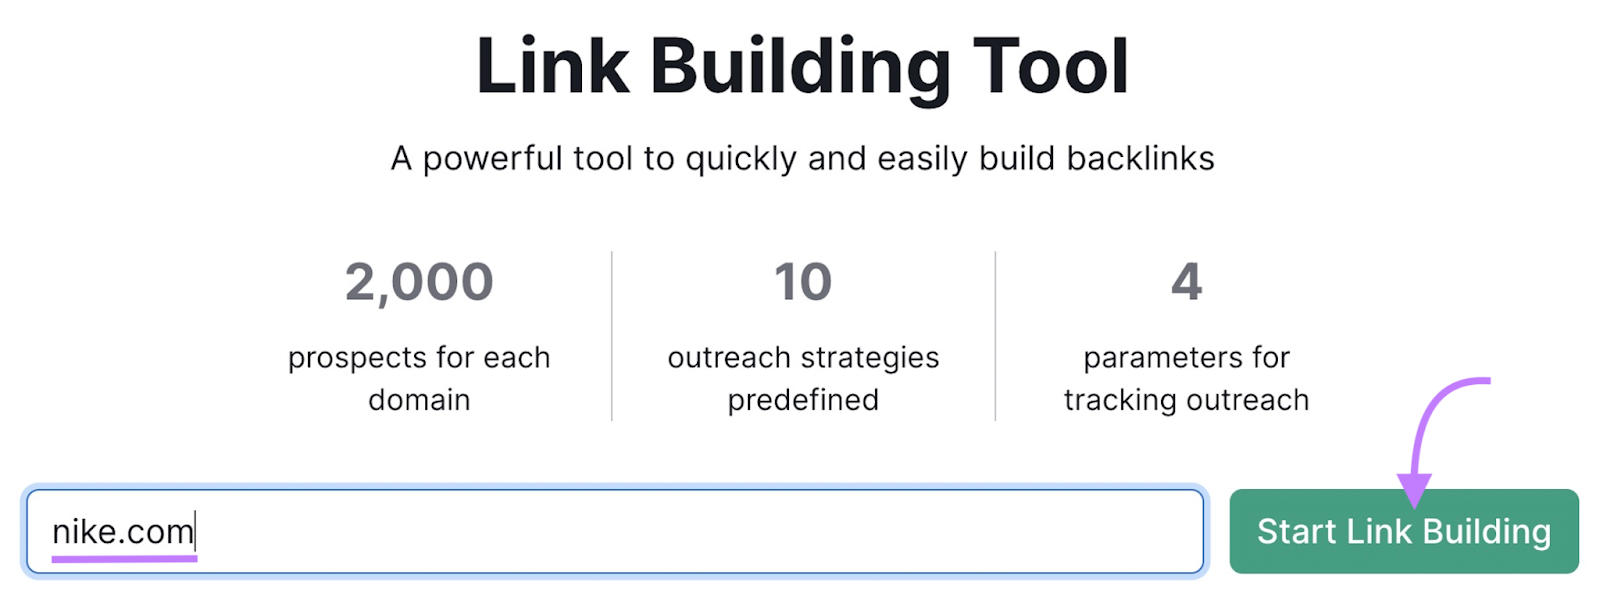 search for "nike.com" in Link Building Tool